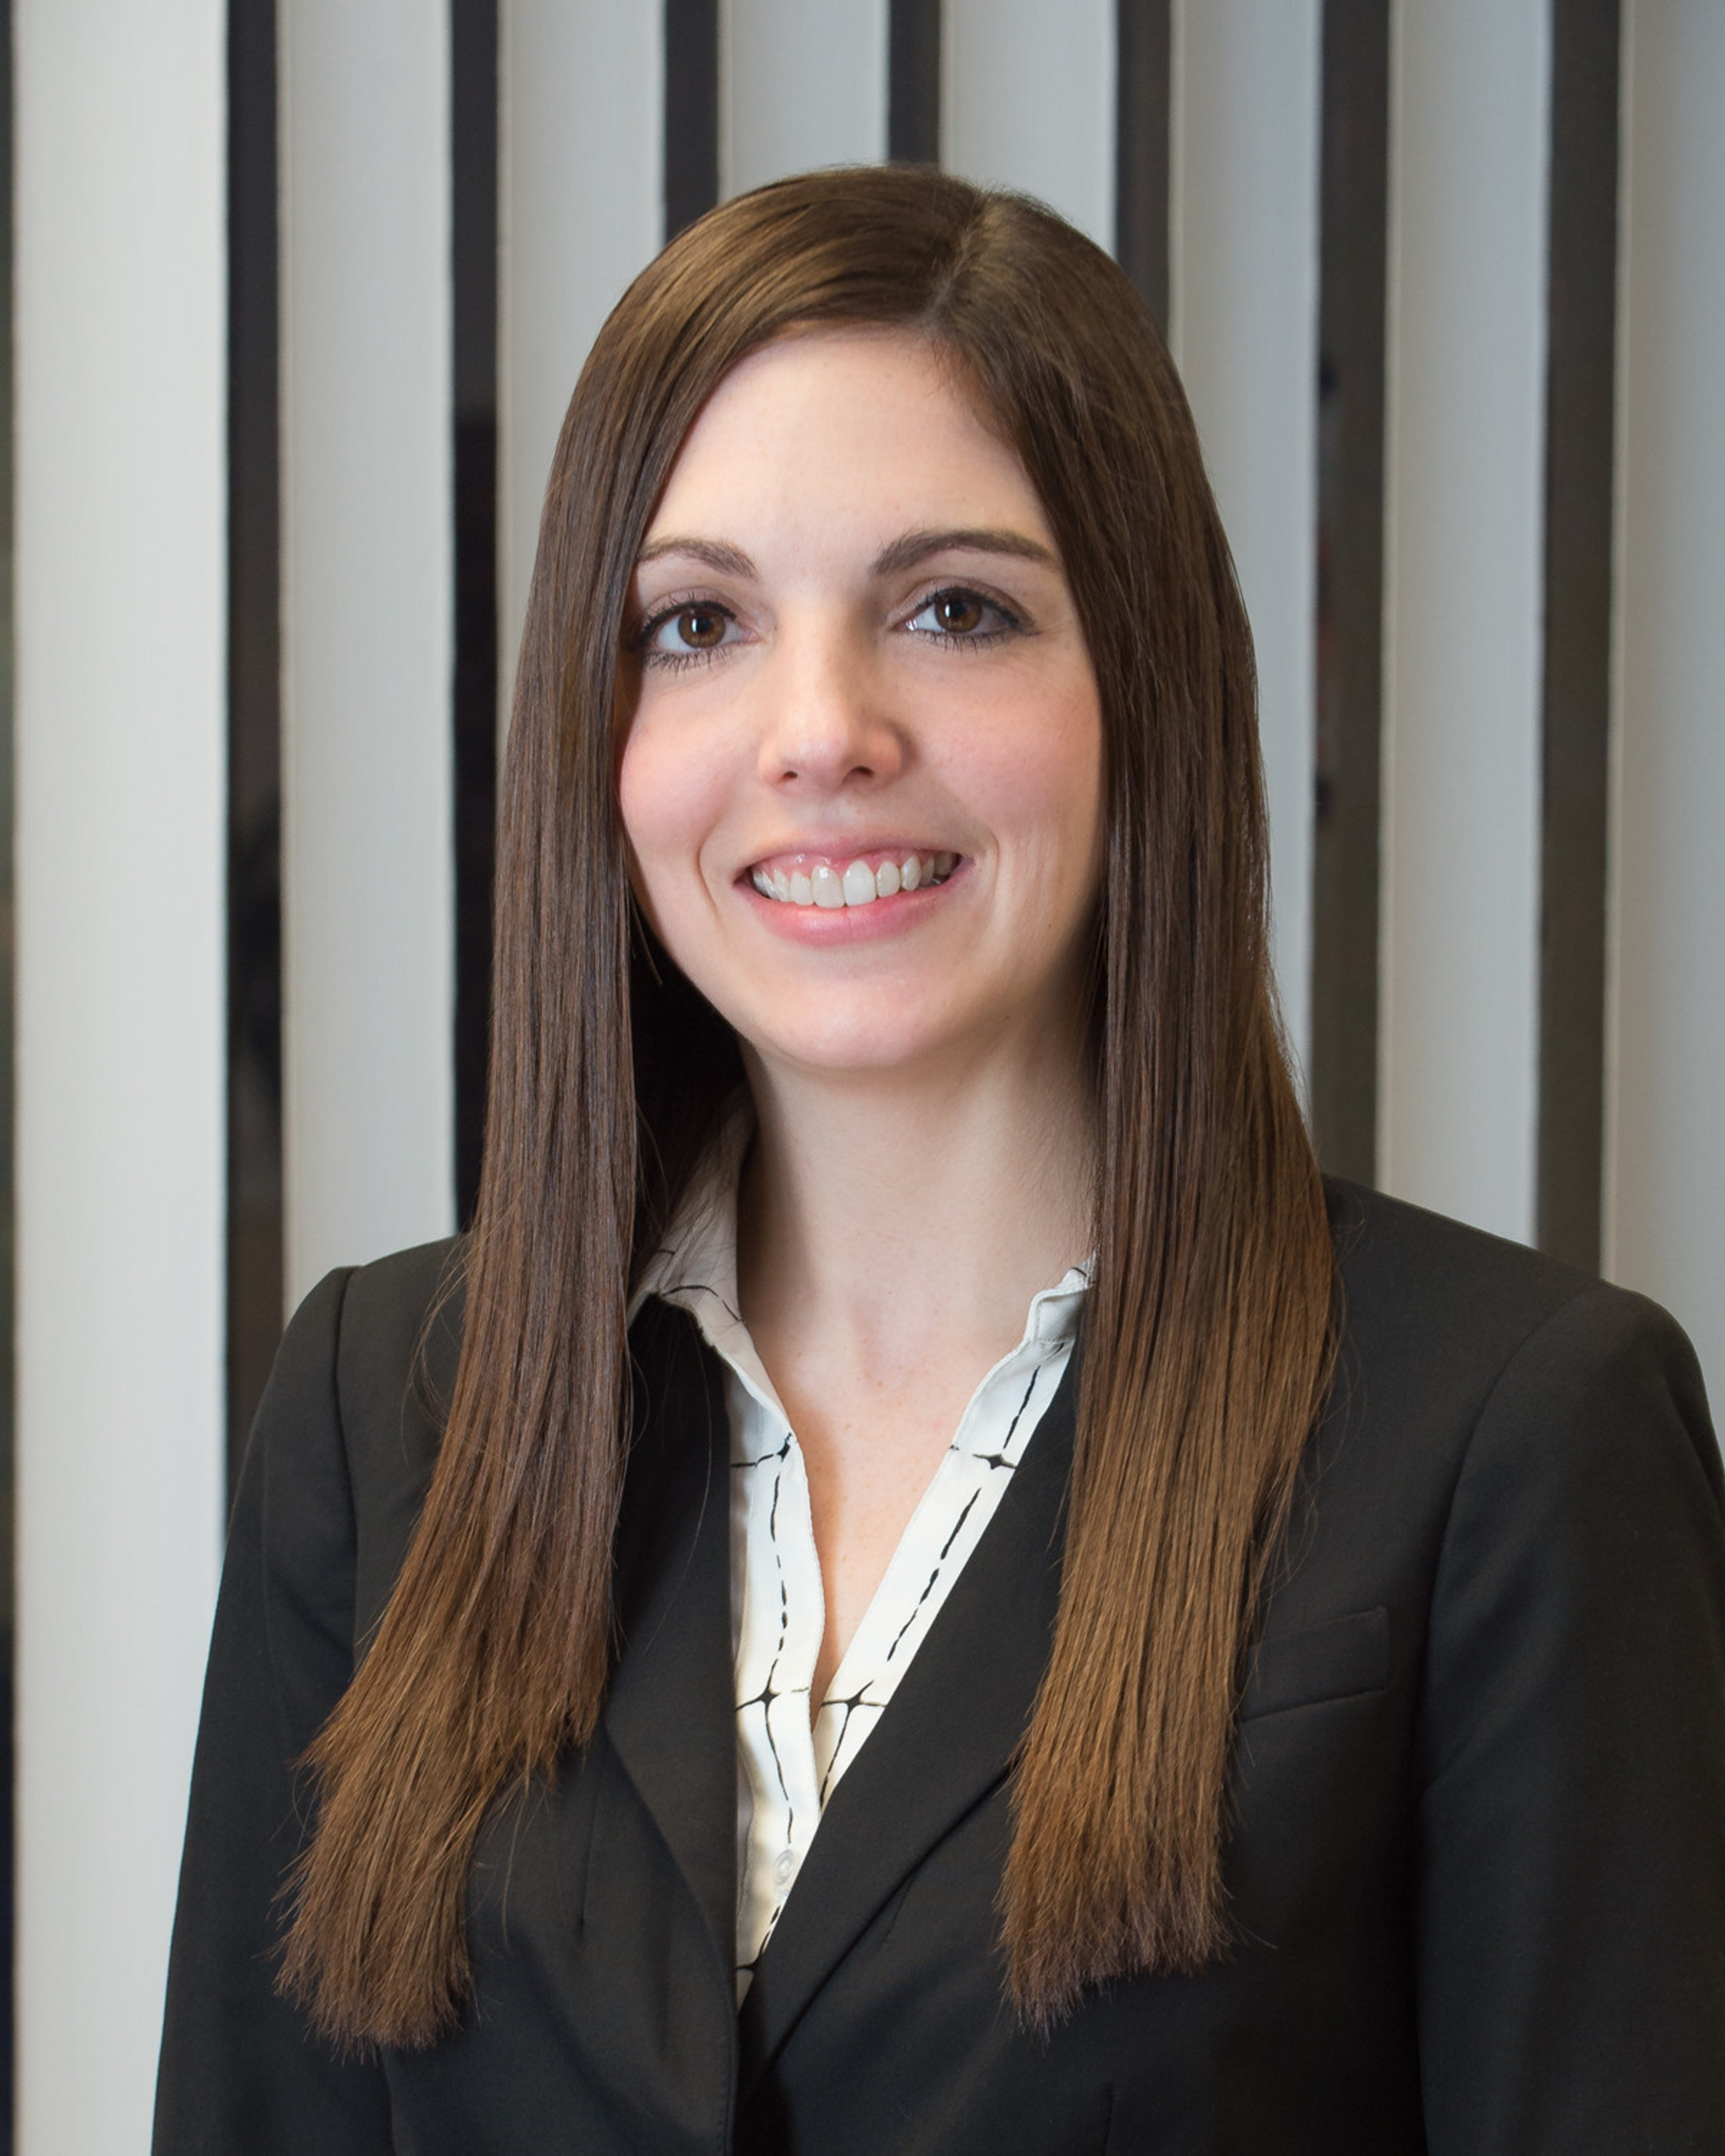 Stefanie L. Deka has joined McGlinchey Stafford's Cleveland office and national Commercial Litigation practice group as an Associate.